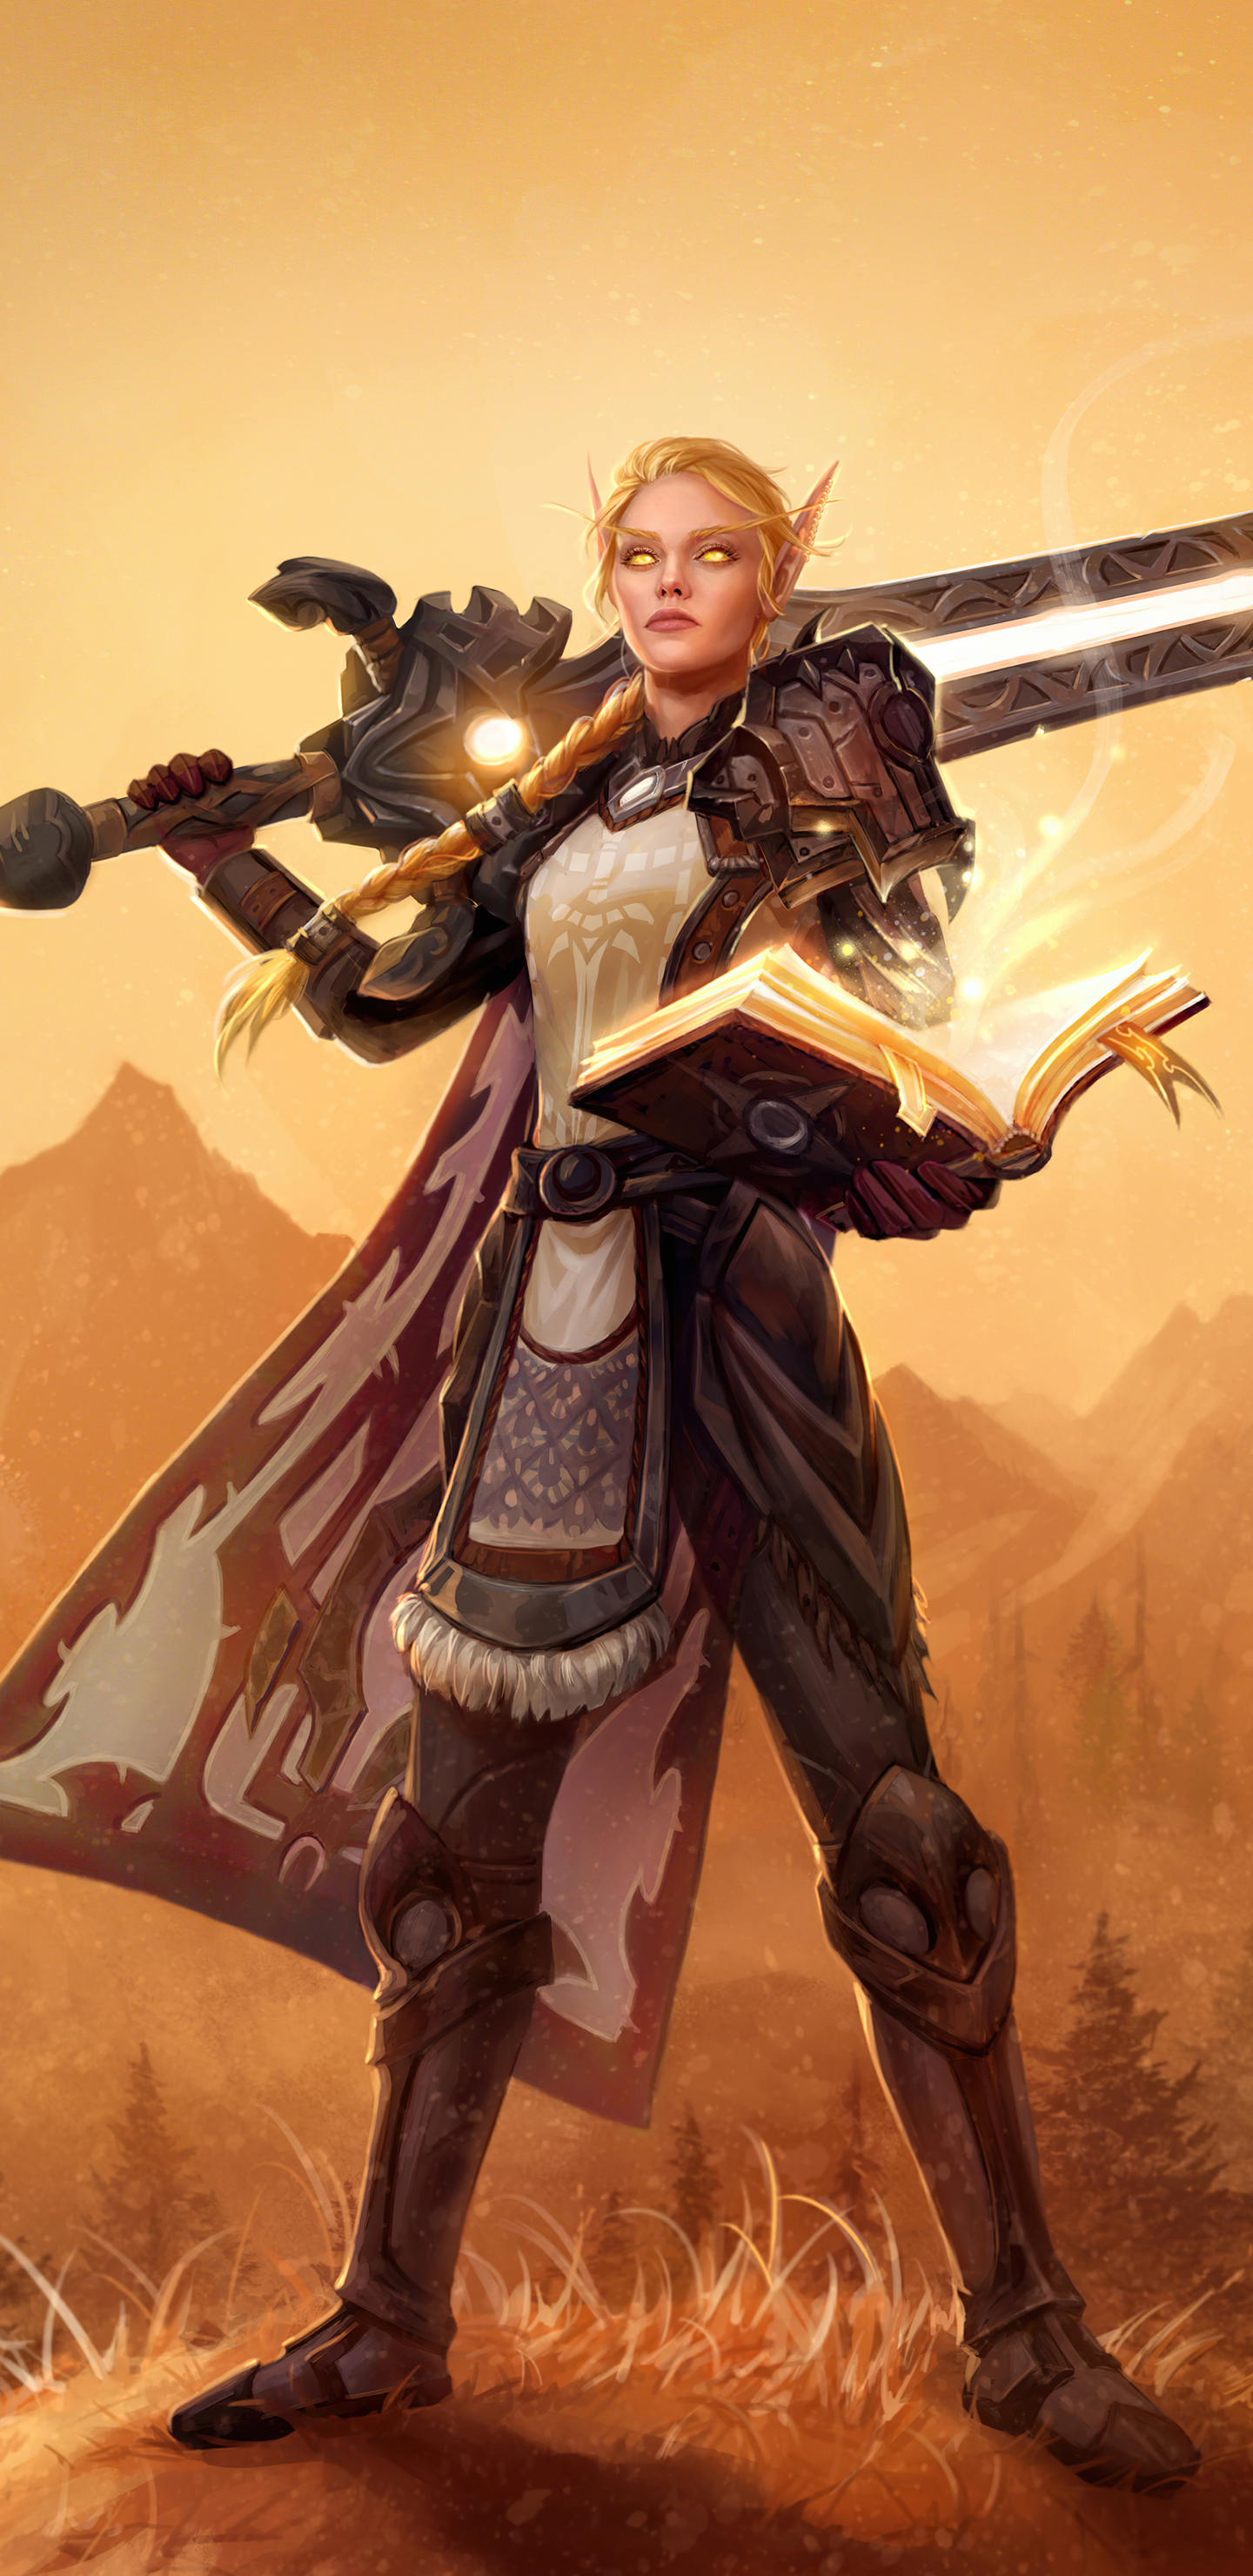 1440x2960 Paladin World Of Warcraft 4k Samsung Galaxy Note 9,8, S9,S8,S8+ QHD HD 4k Wallpapers, Images, Backgrounds, Photos and Pictures